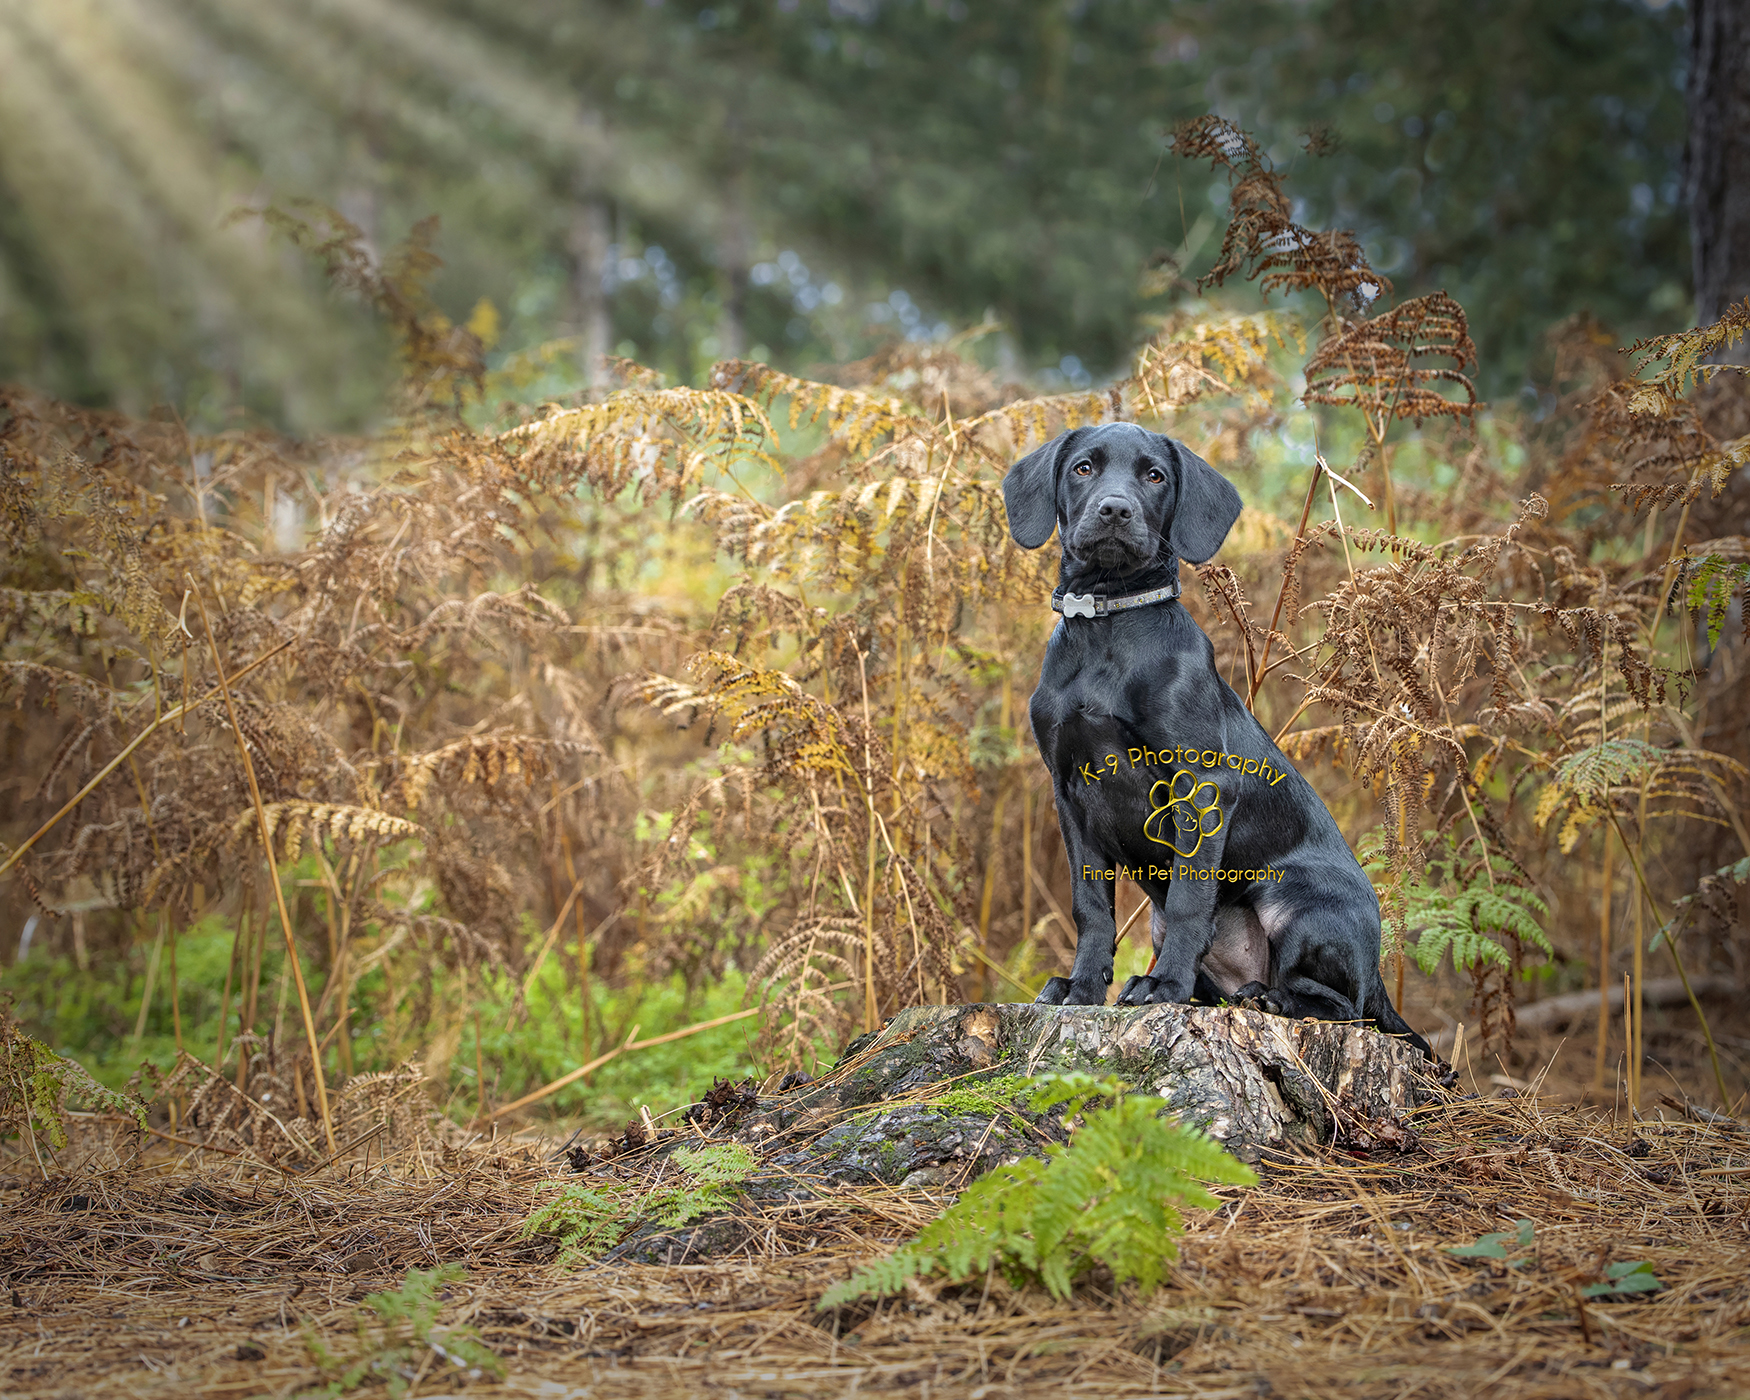 Award winning Dog Photography from Bedford Pet photographer Adrian Bullers